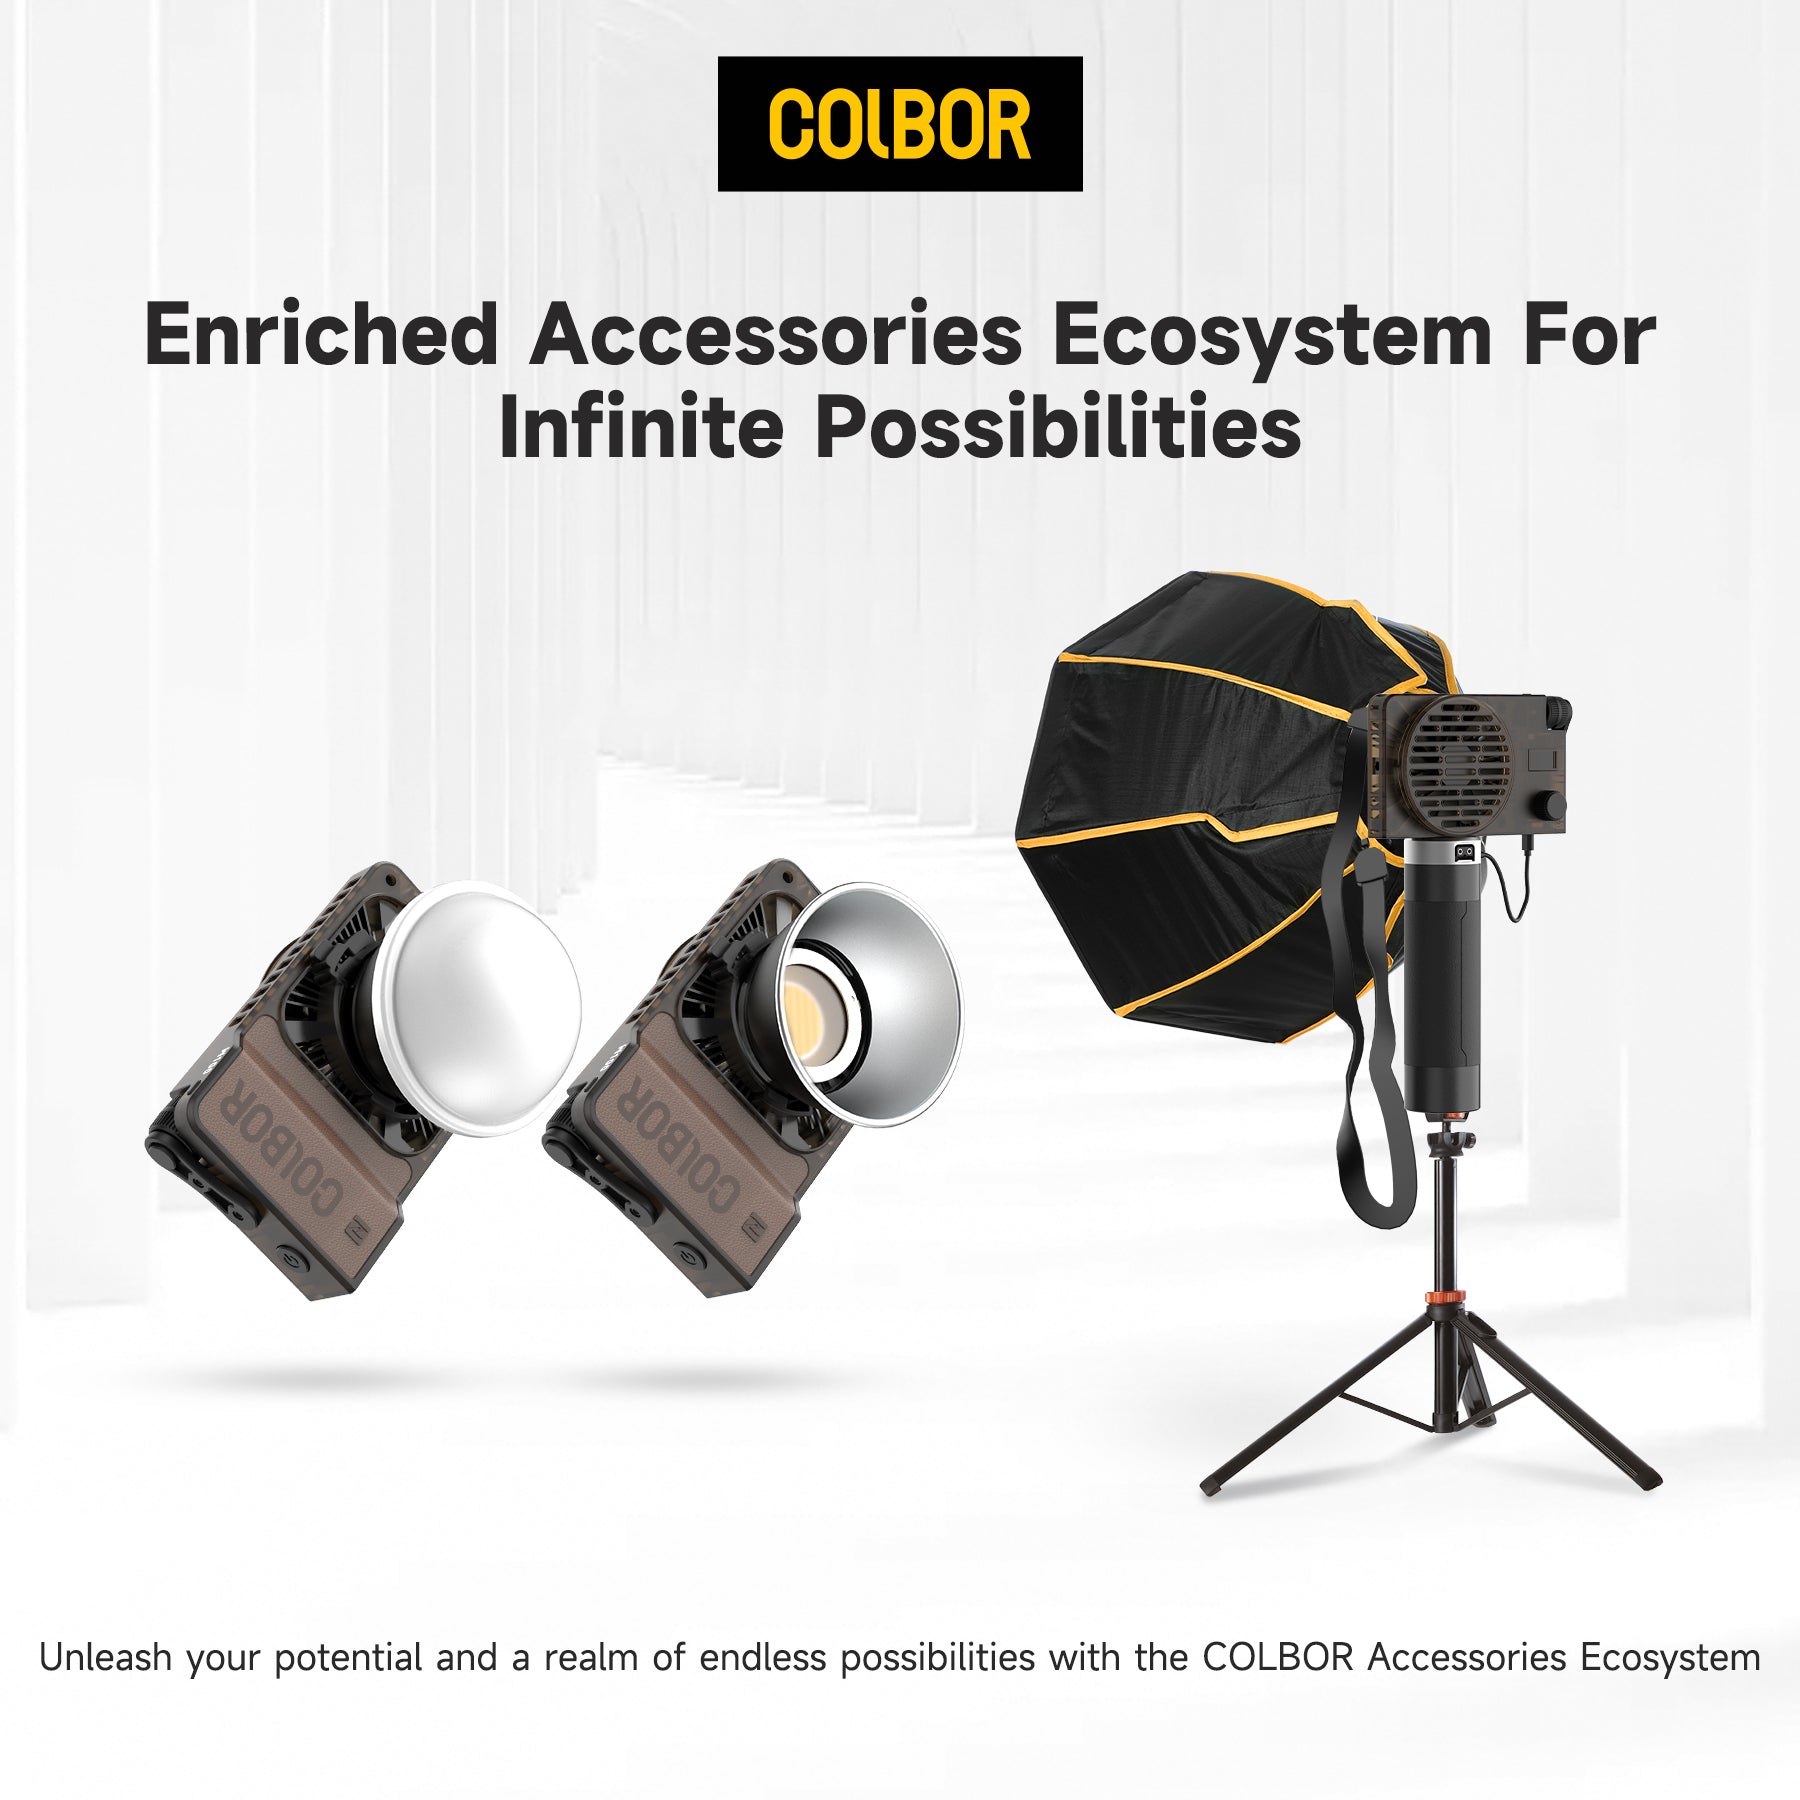 Colbor W100 Portable LED Video Light for Photography Video YouTube TikTok Outdoor Shooting